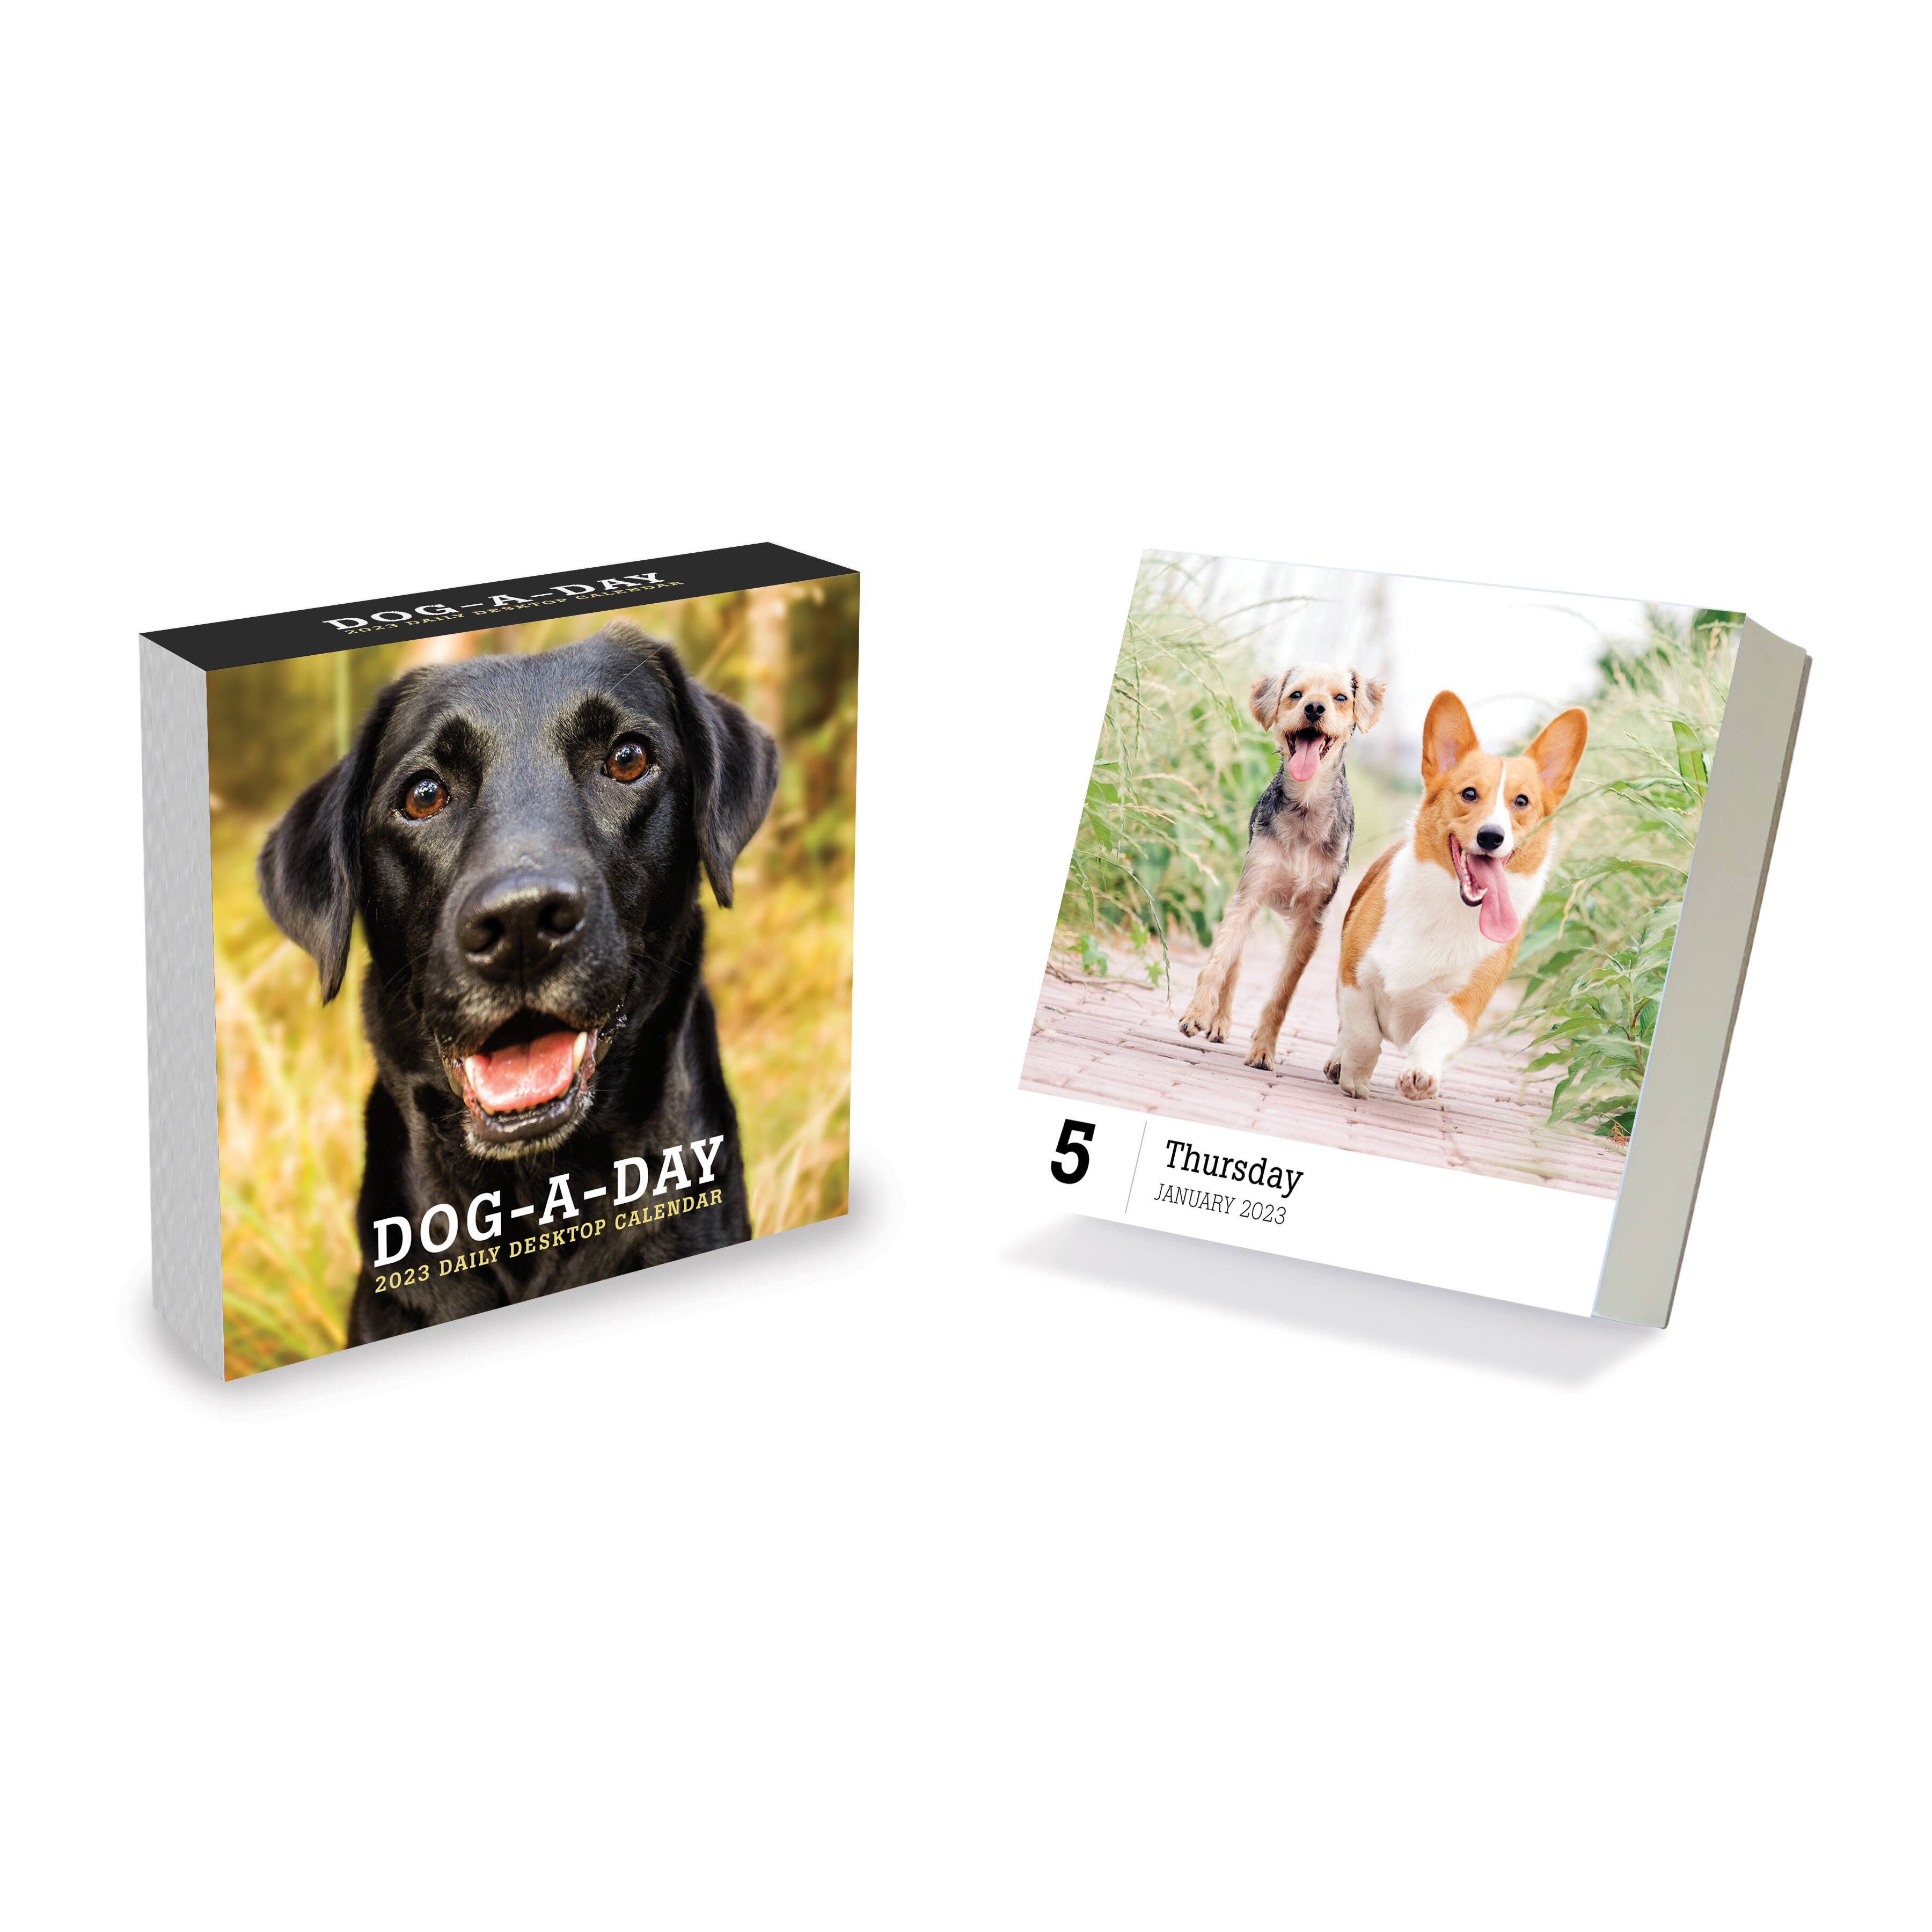 Home or Office Organization Tear-Off Pages TF PUBLISHING 5.25 x 5.25 2022 Dog A Day Daily Desktop Calendar Fold-Out Cardboard Easel 